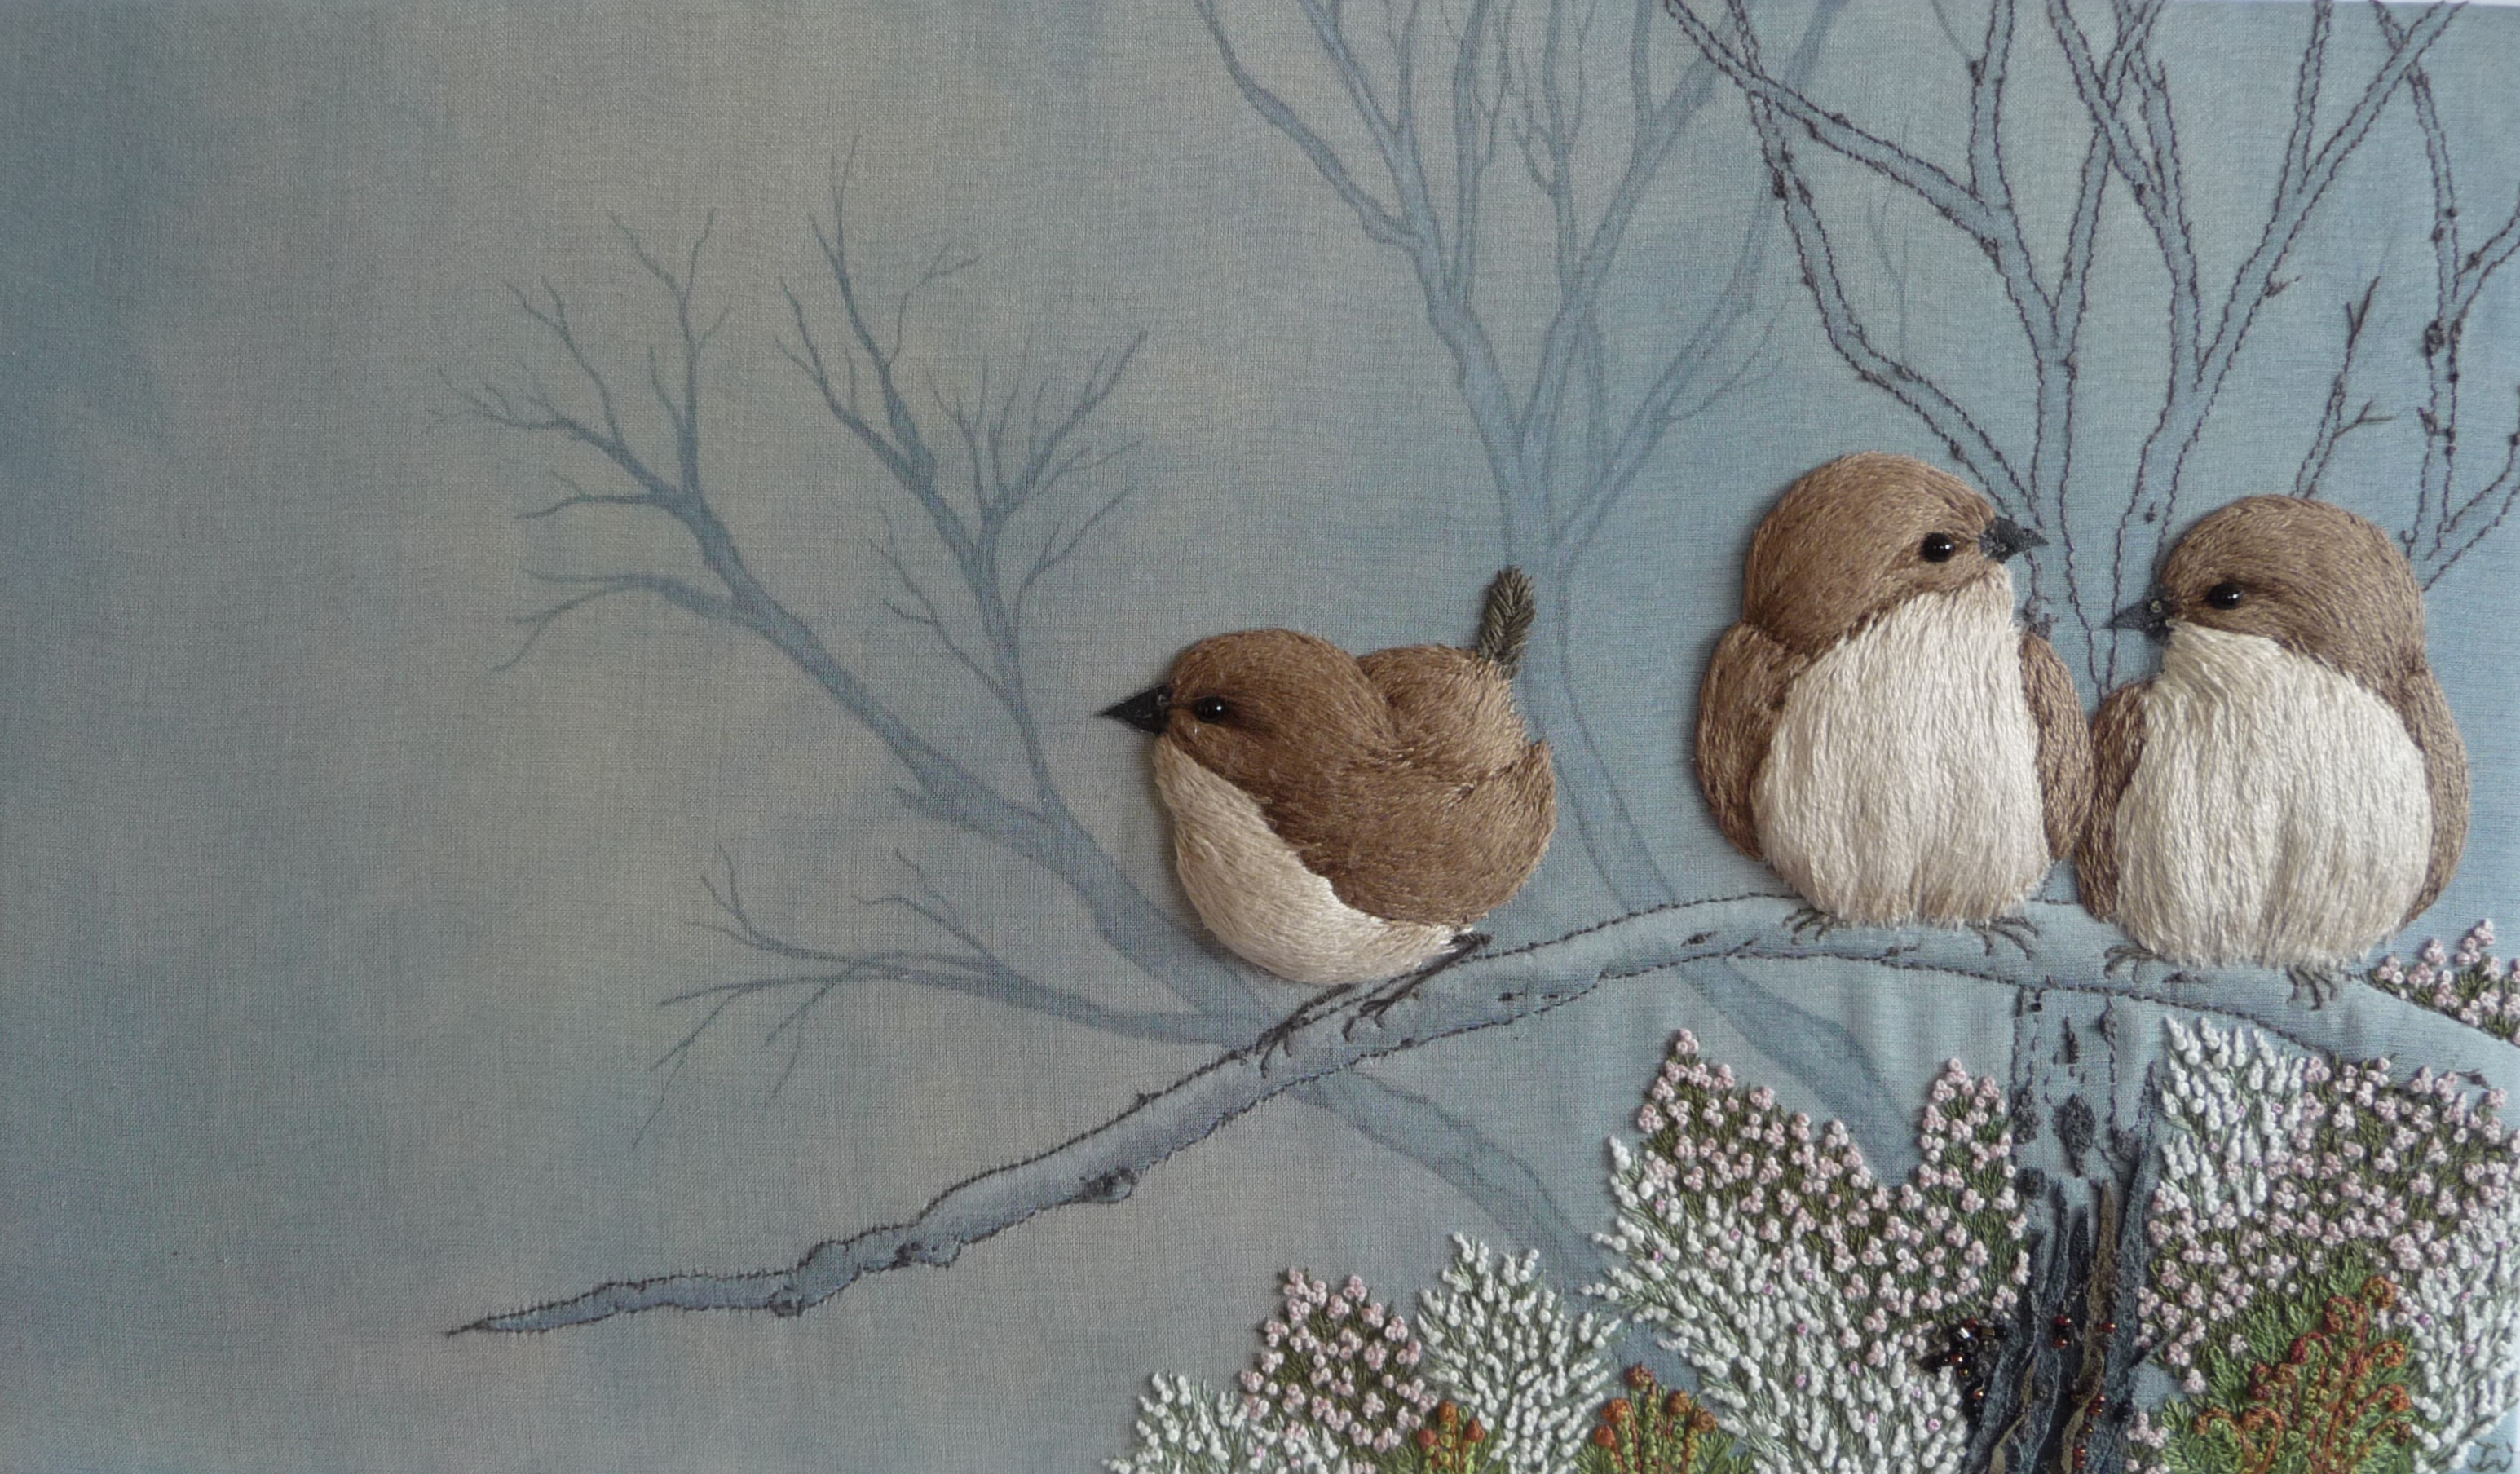 Embroidered image of three small birds on a branch